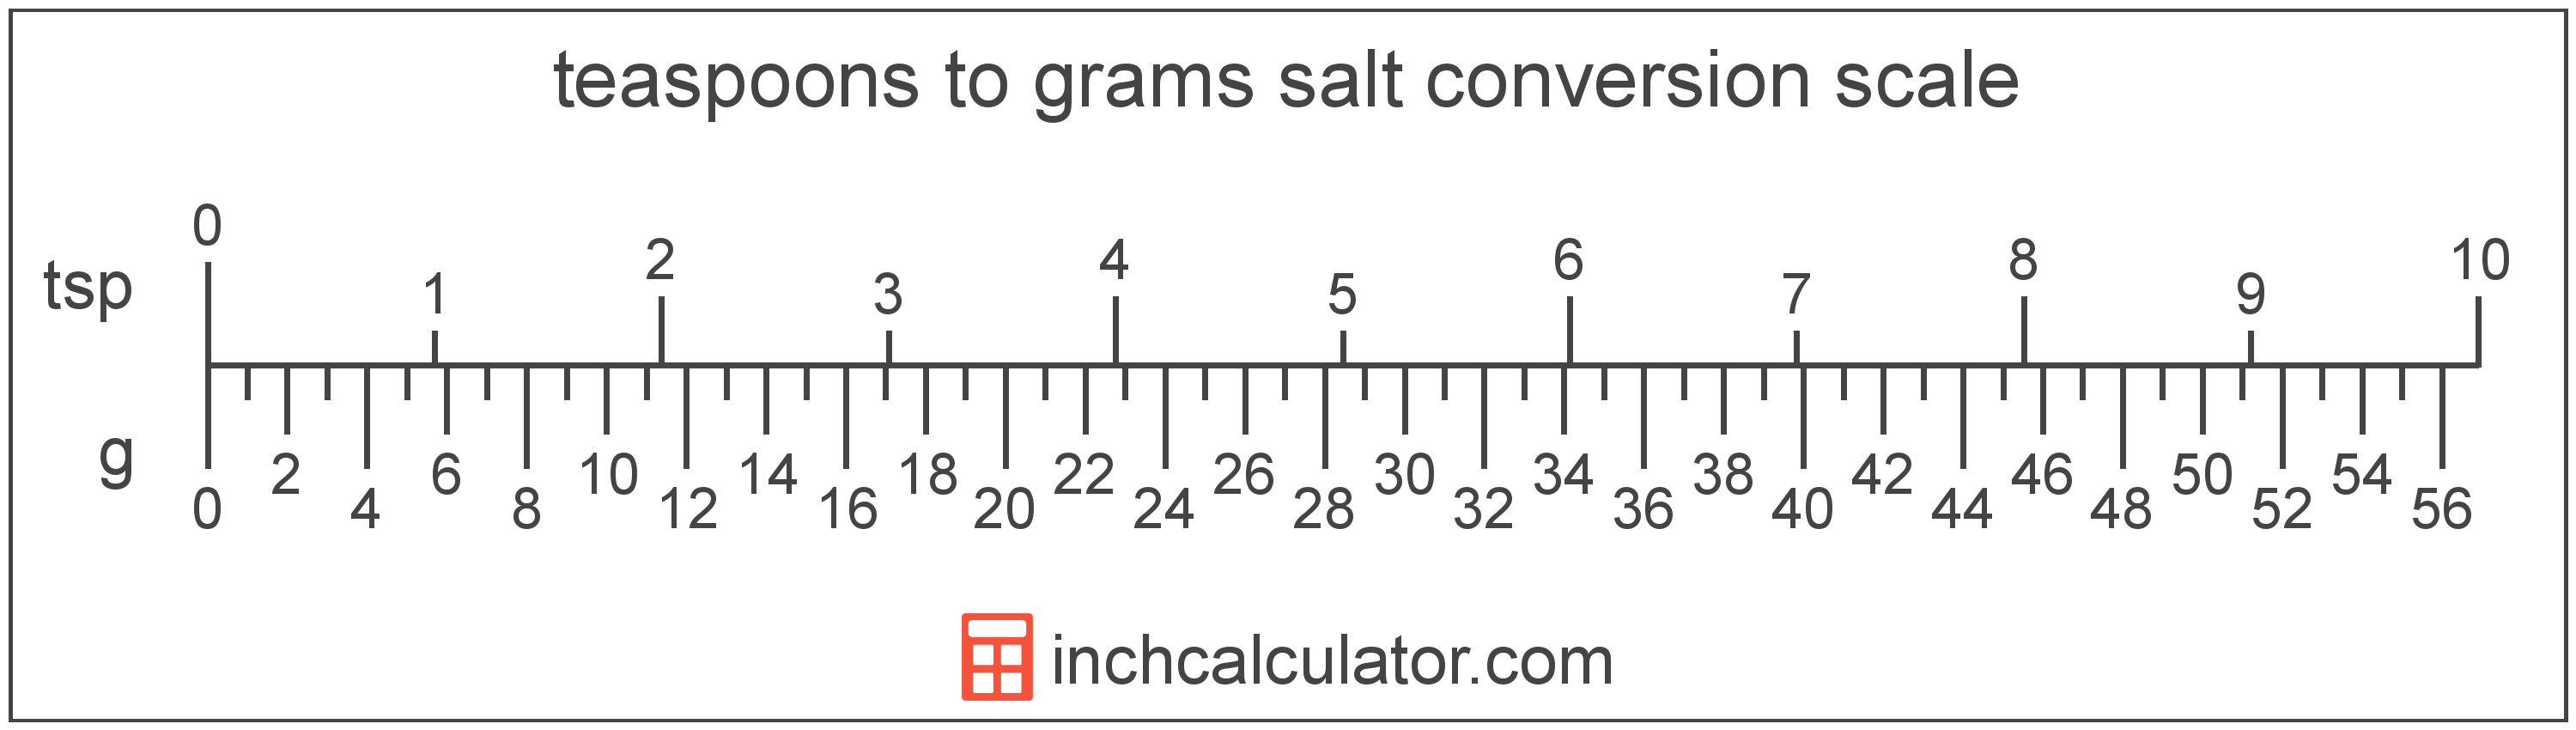 Convert Grams To Cups Chart